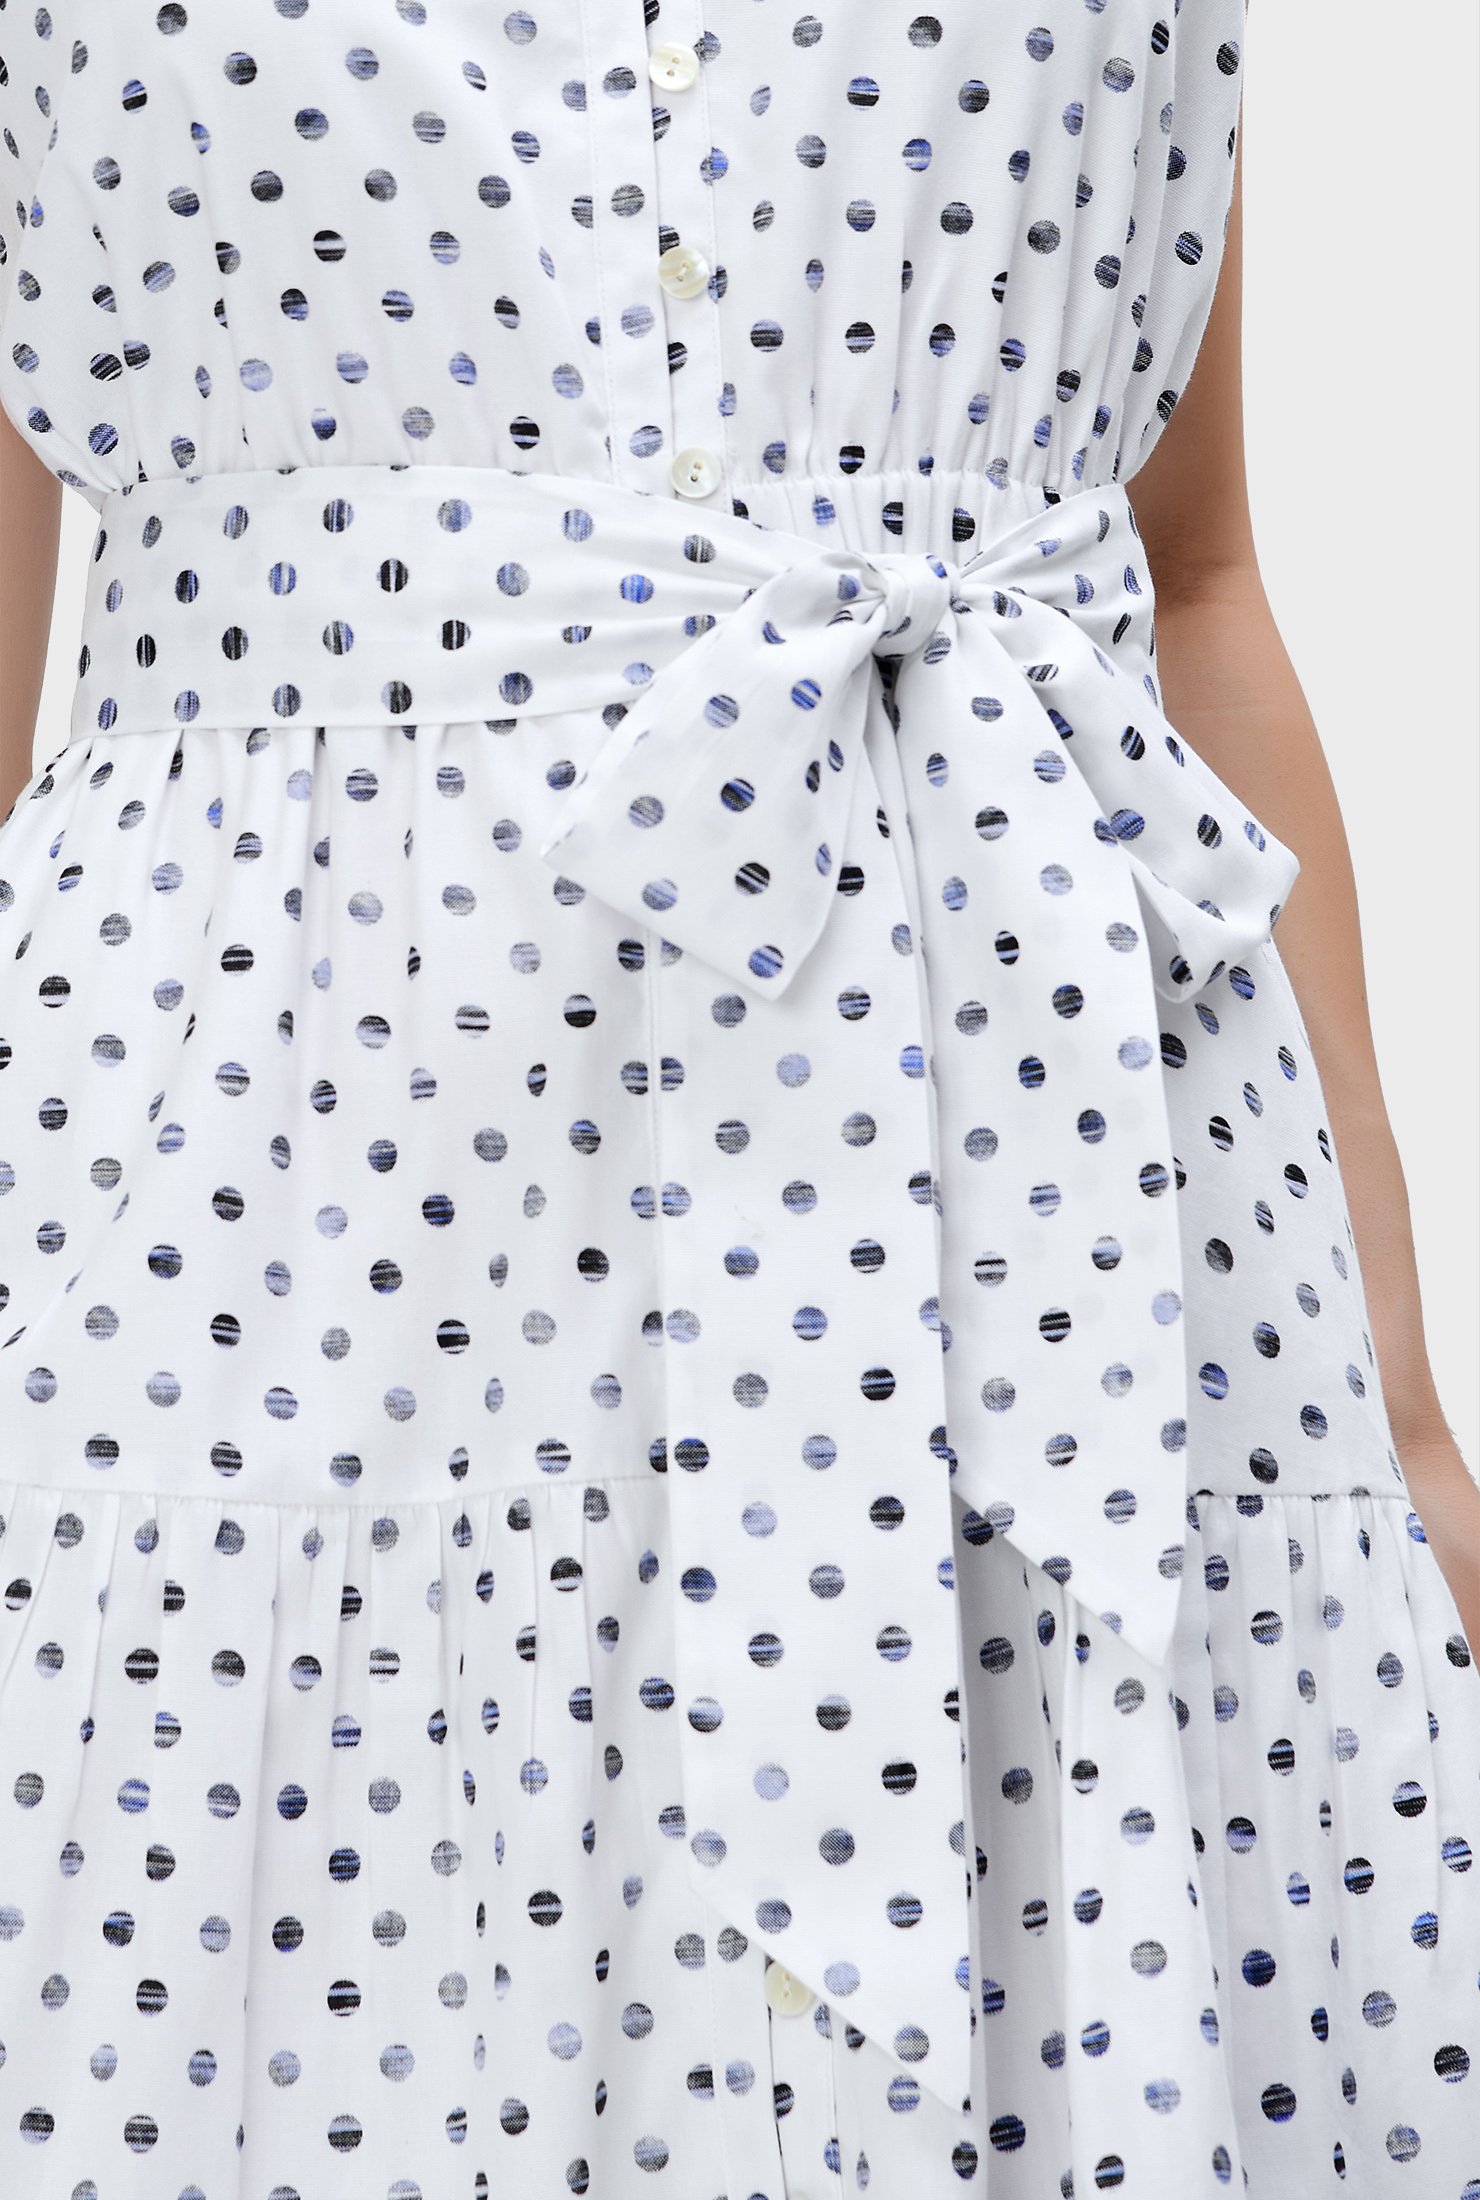 Fresh as the season itself, our happy polka dot print cotton elevates the everyday with eye-catching details like embellished scallops at the swingy hem.